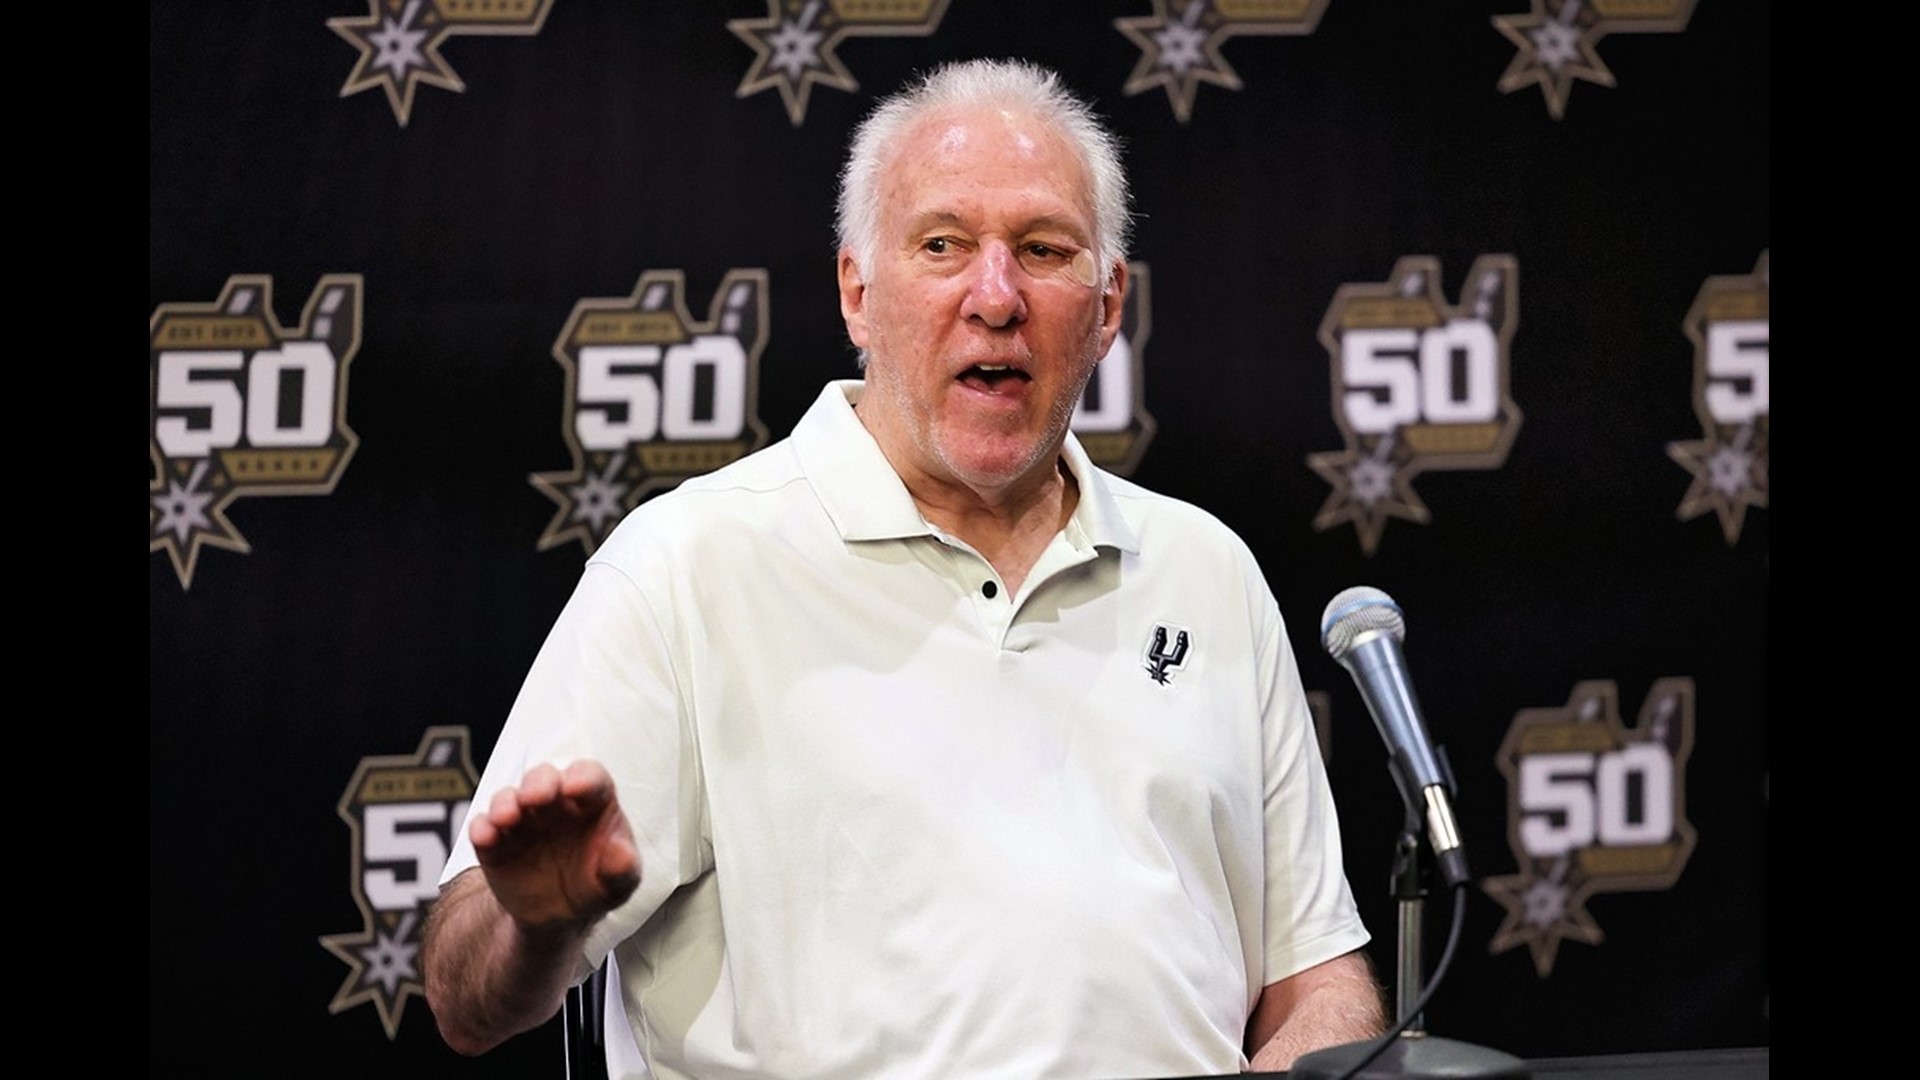 Pop advised against betting on this team to win a title, but everyone on San Antonio's young roster is motivated to learn, grow, and prove people wrong.